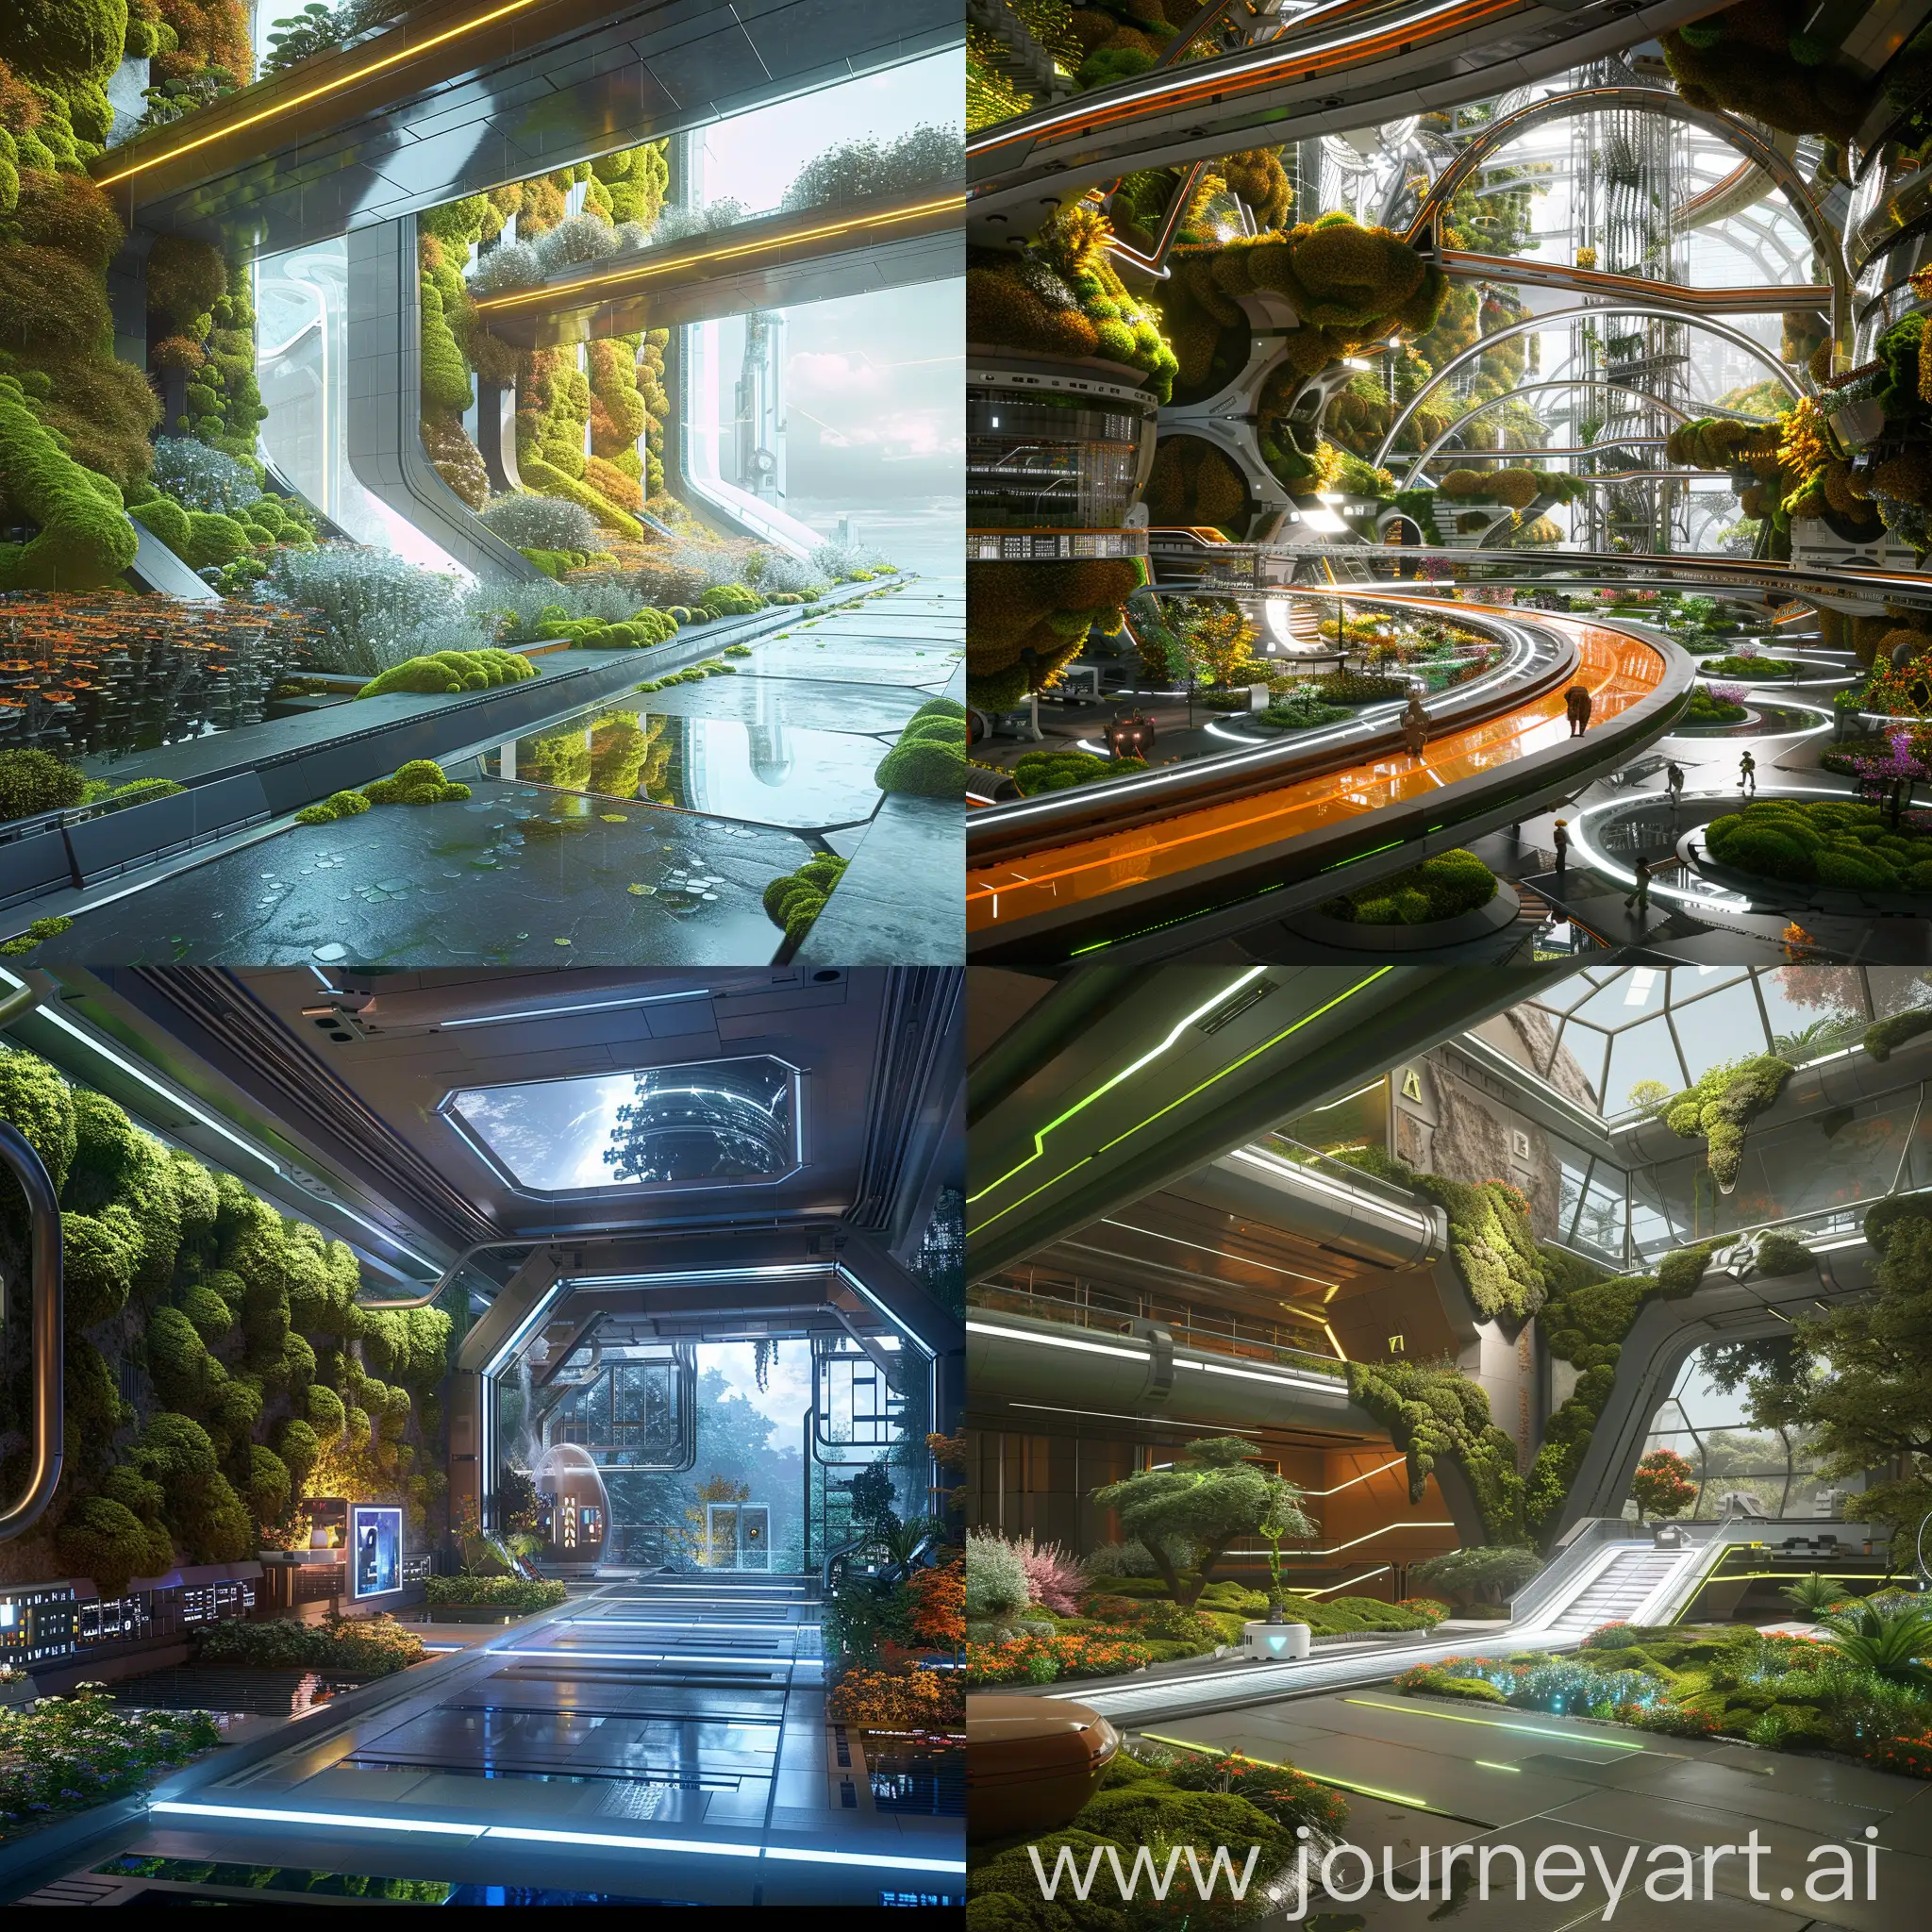 Futuristic Kostroma, Bioluminescent Moss Walls (Avatar), Modular Construction (LEGO), Nanotech Reinforced Materials (Star Trek), Weather Regulation Systems (Elysium), Augmented Reality Overlays (Ready Player One), Kinetic Energy Harvesting Floors (Star Wars), Holographic Displays (Star Wars), 3D-Printed Furniture (The Expanse), Hydroponic Gardens (The Martian), AI-Powered Building Management (Her), Living Facades (Vertical Gardens, Hayao Miyazaki films), Kinetic Facades (Apple Park), Skybridges and Walkways (Blade Runner), Self-Cleaning Surfaces (Back to the Future II), Energy-Harvesting Roofs (Cyberpunk 2077), Vertical Wind Farms (Mass Effect), Adaptive Camouflage (Halo), Hydroponic Rooftop Farms (Overwatch), Transparent Aluminum (Star Trek), Bioluminescent Accents (Avatar), unreal engine 5 --stylize 1000